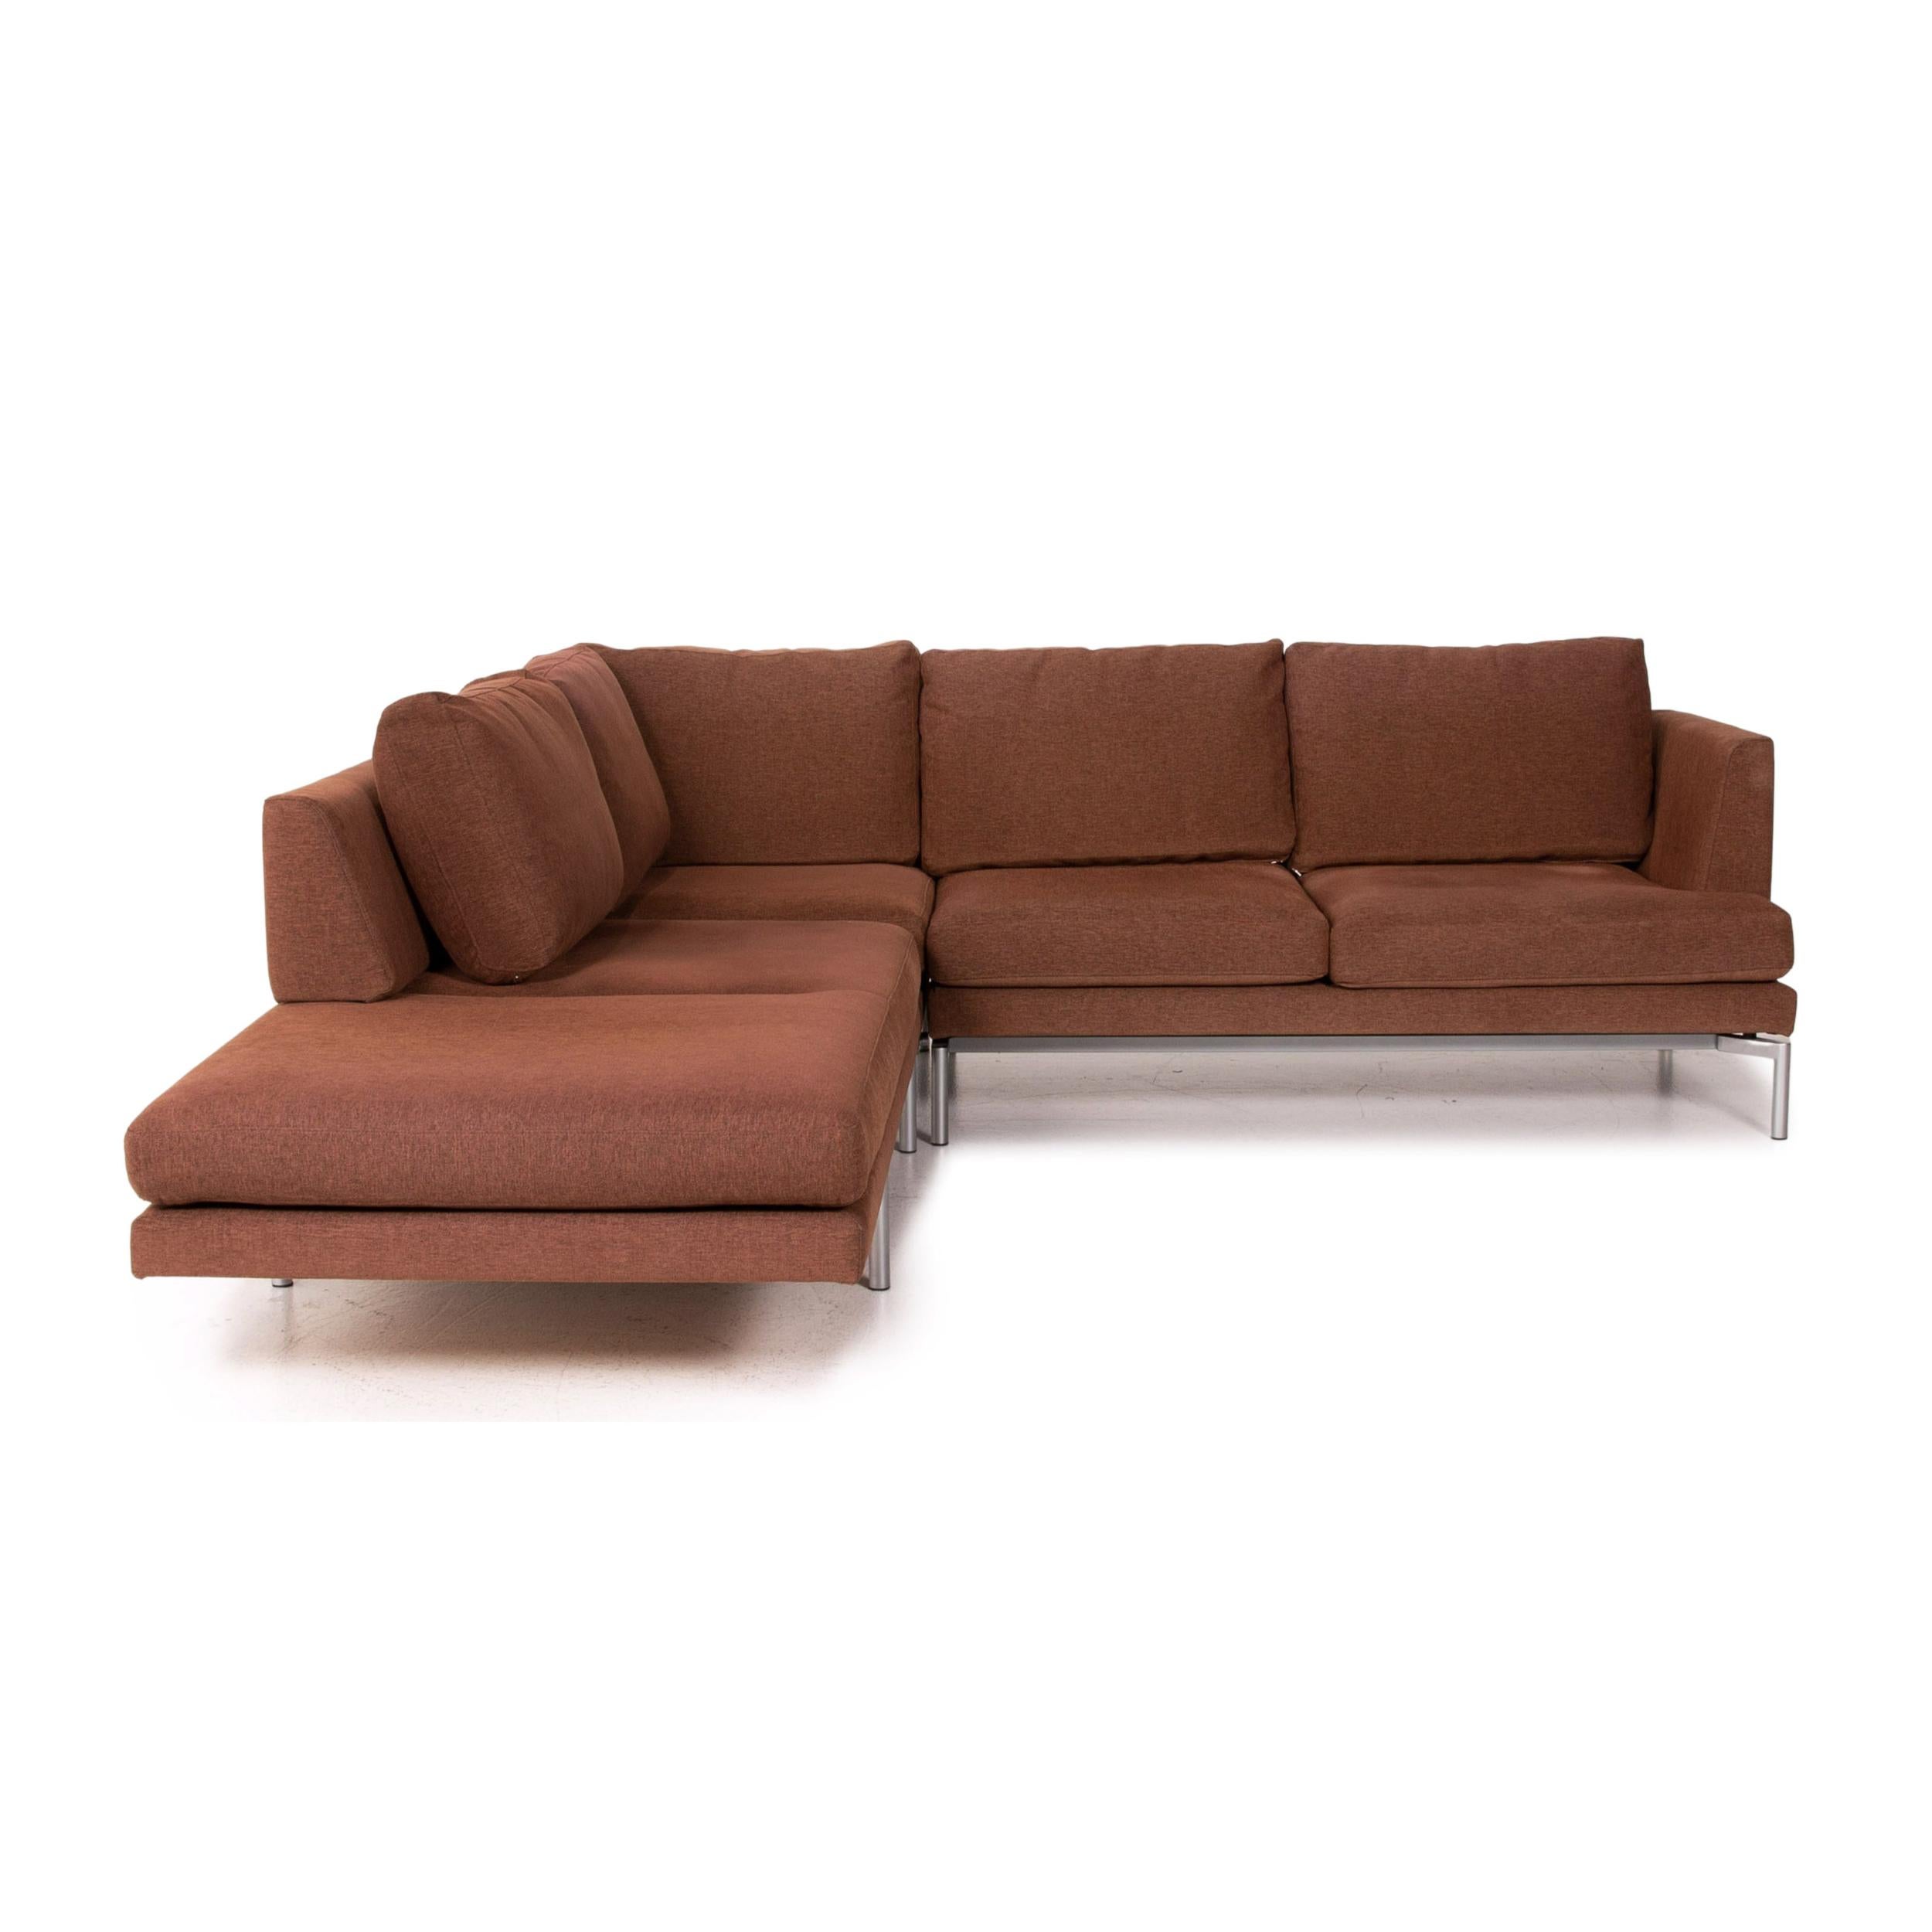 Walter Knoll Good Times Fabric Corner Sofa Brown Function Couch 4